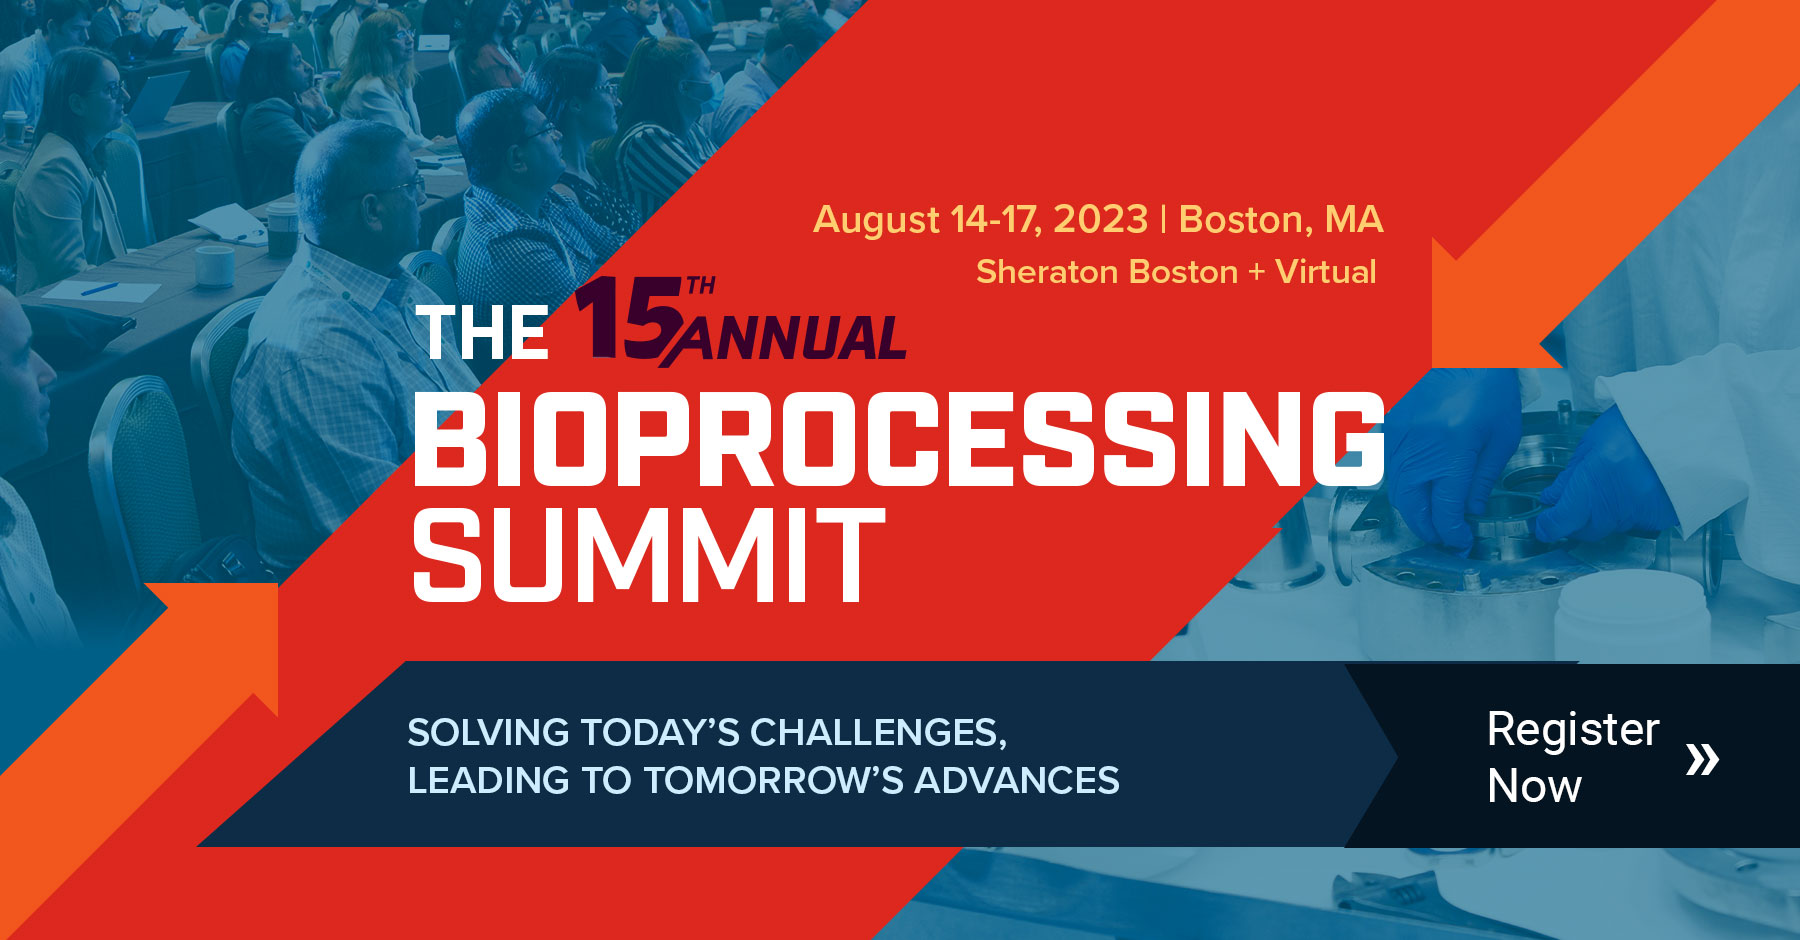 The Bioprocessing Summit August 1417, 2023 The Industry's Flagship